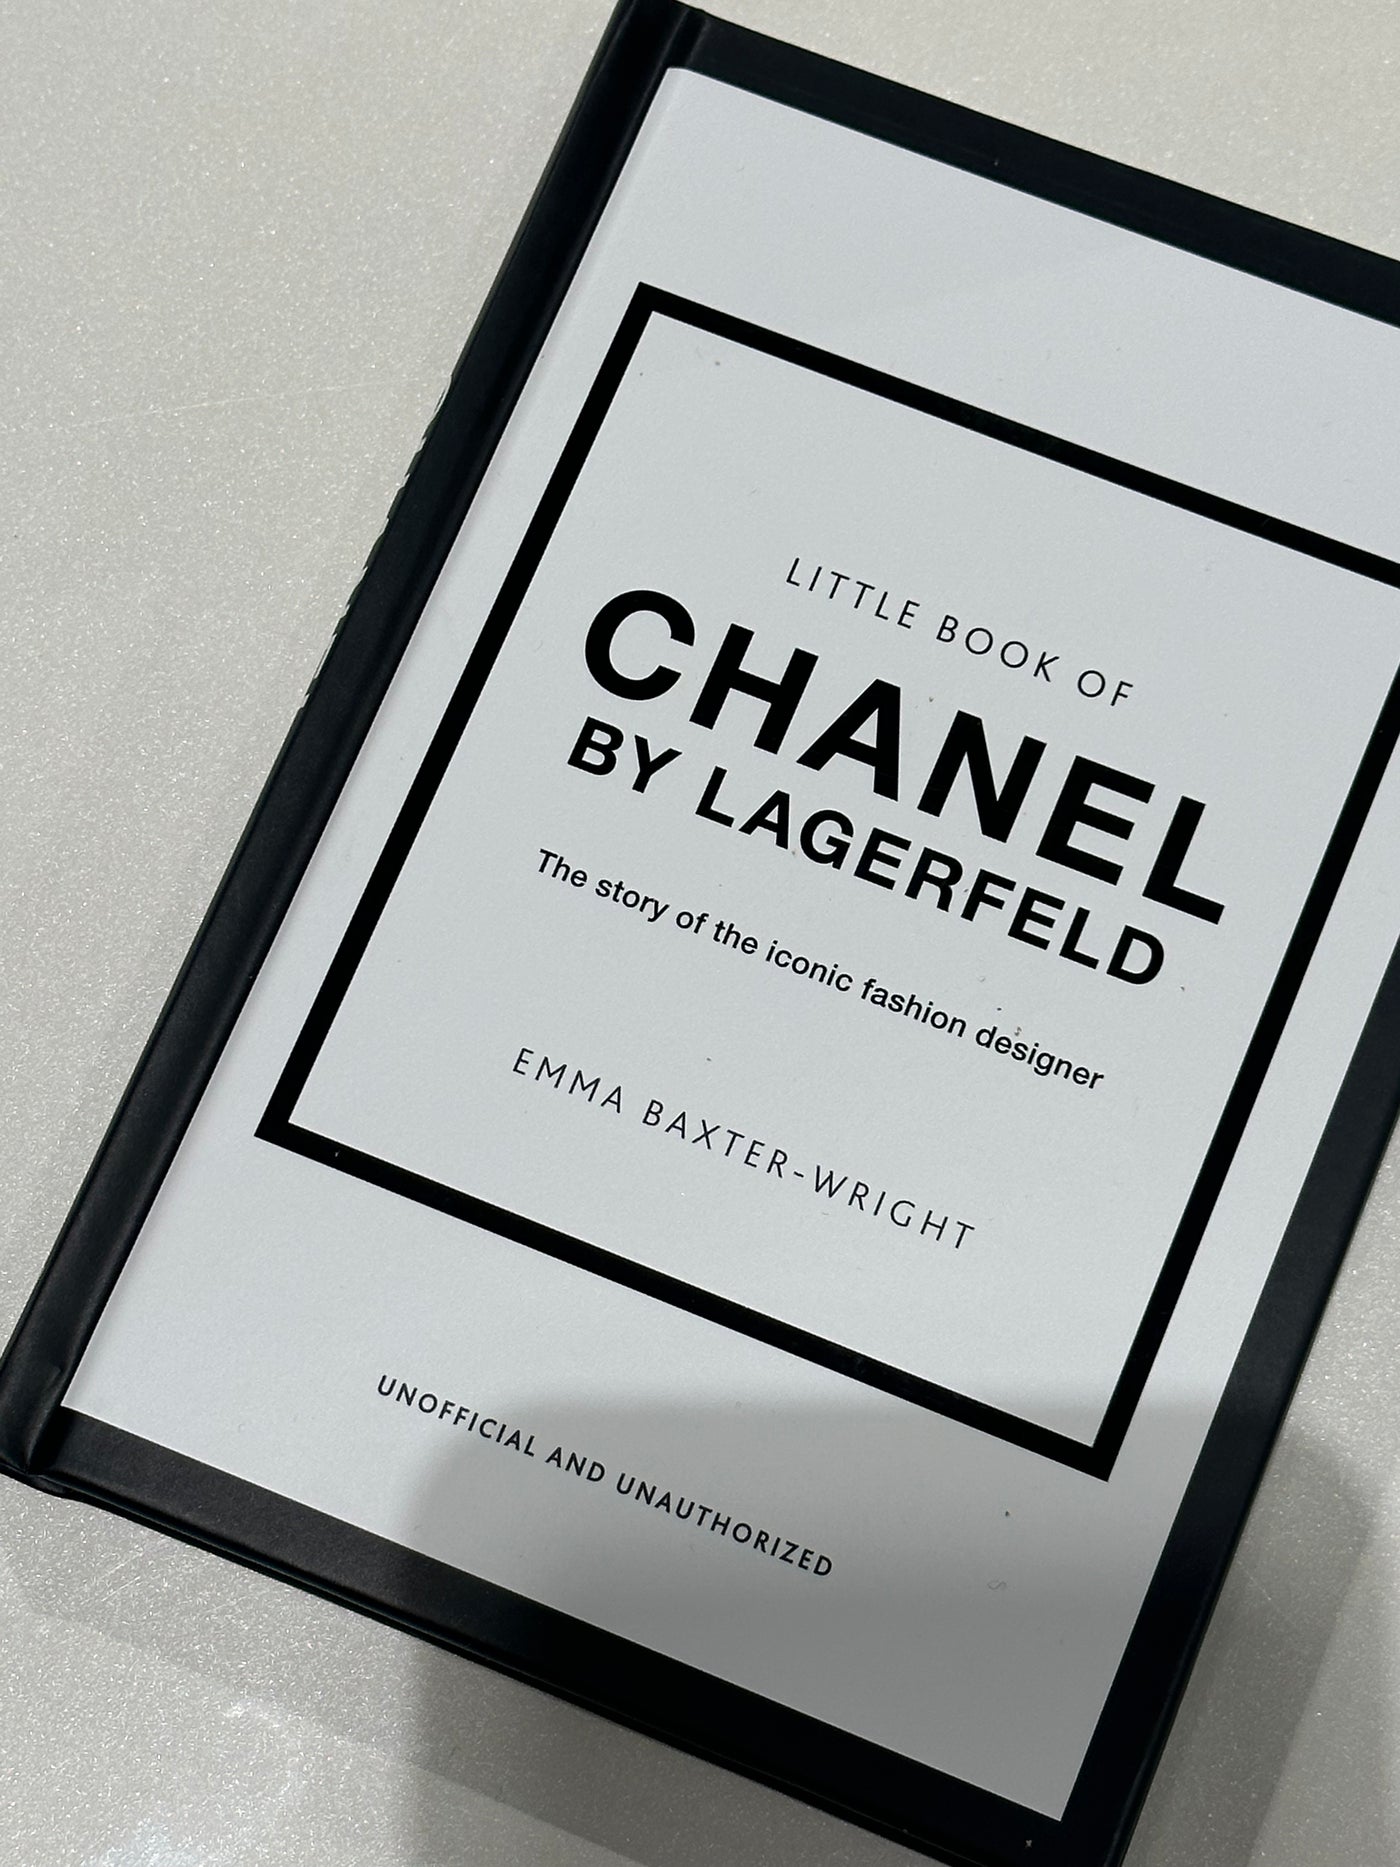 The Little Book Of Chanel by Lagerfield